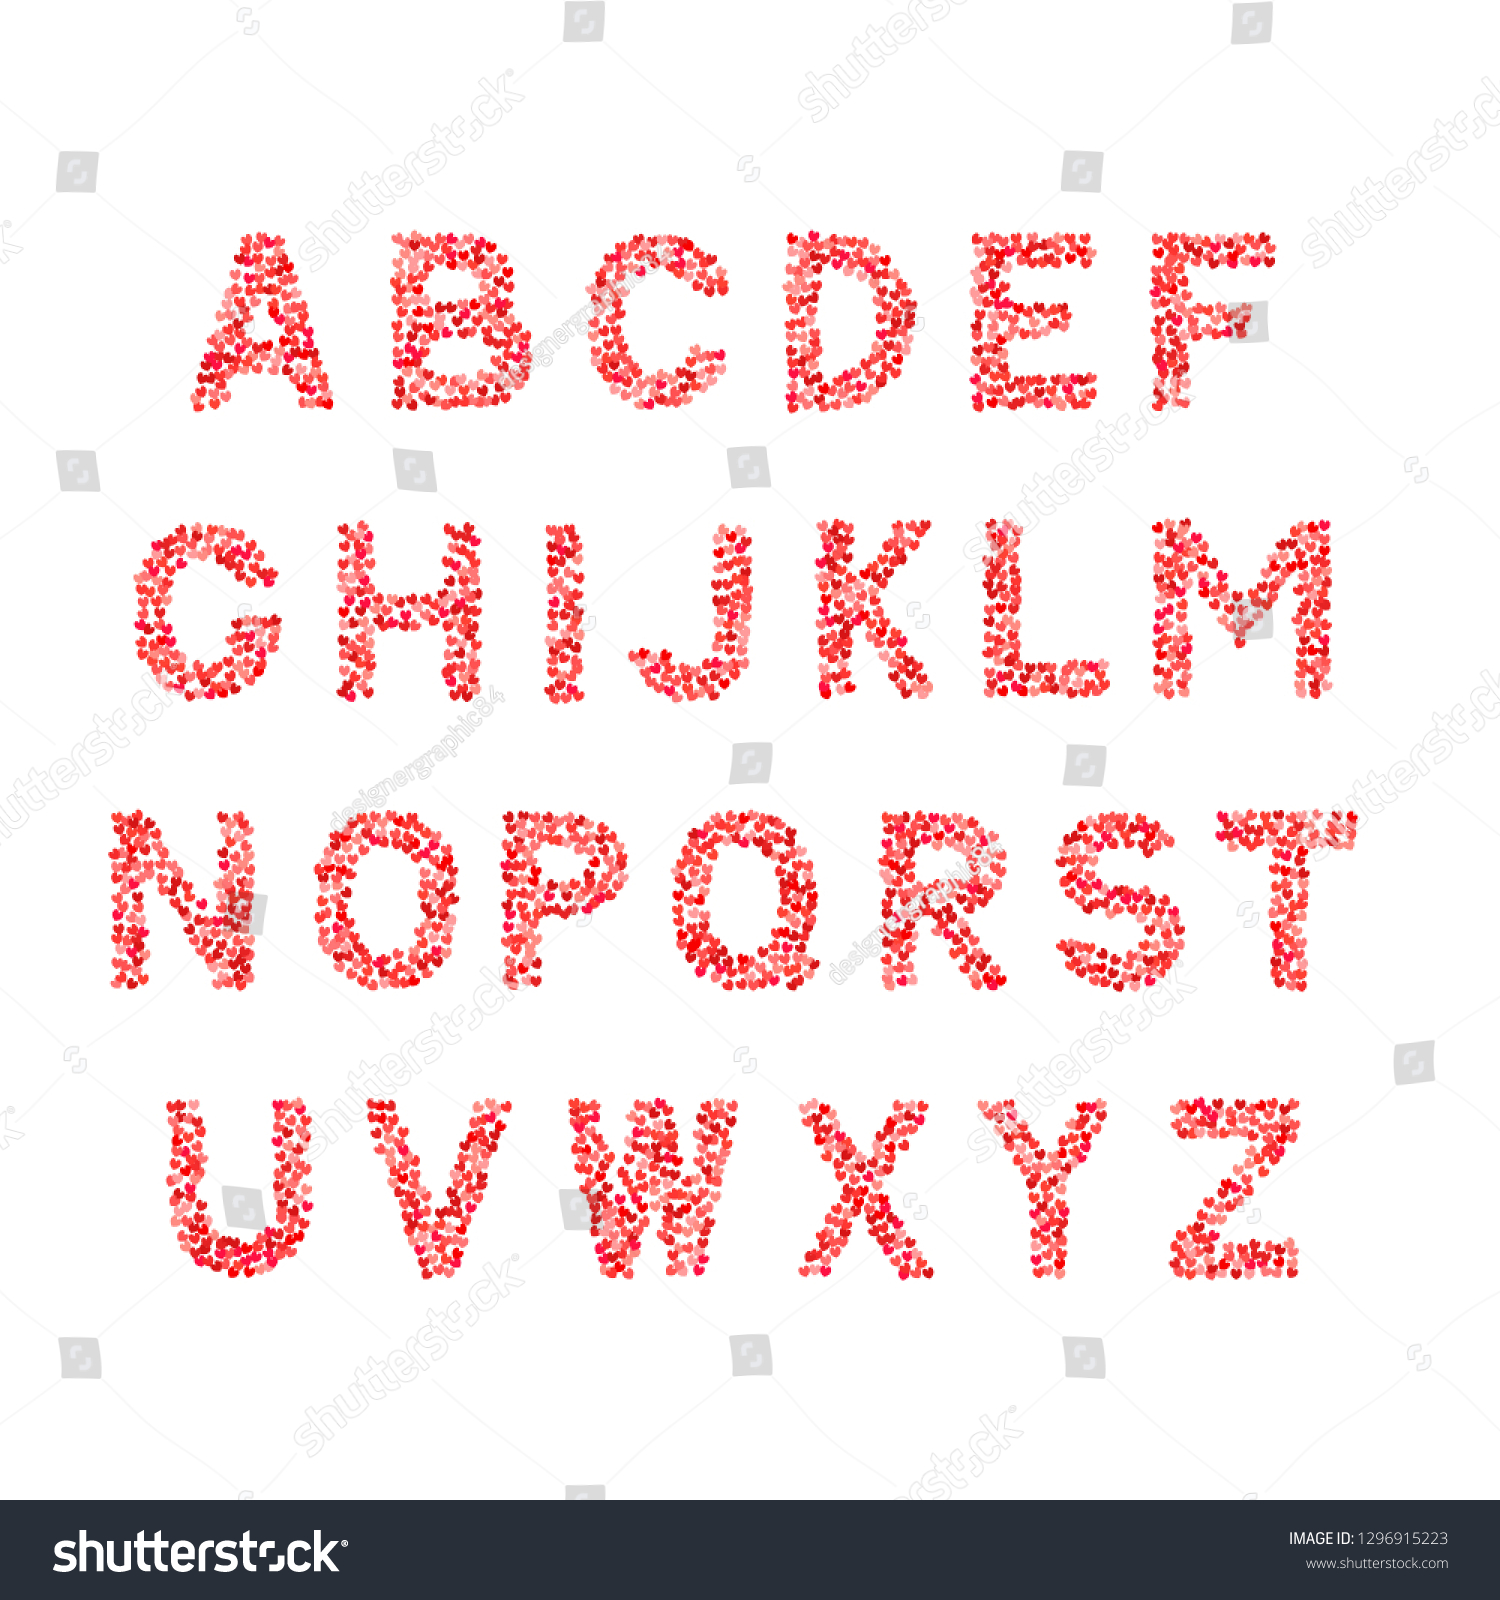 Vector alphabet. Letters A-Z made of hearts - Royalty Free Stock Vector ...